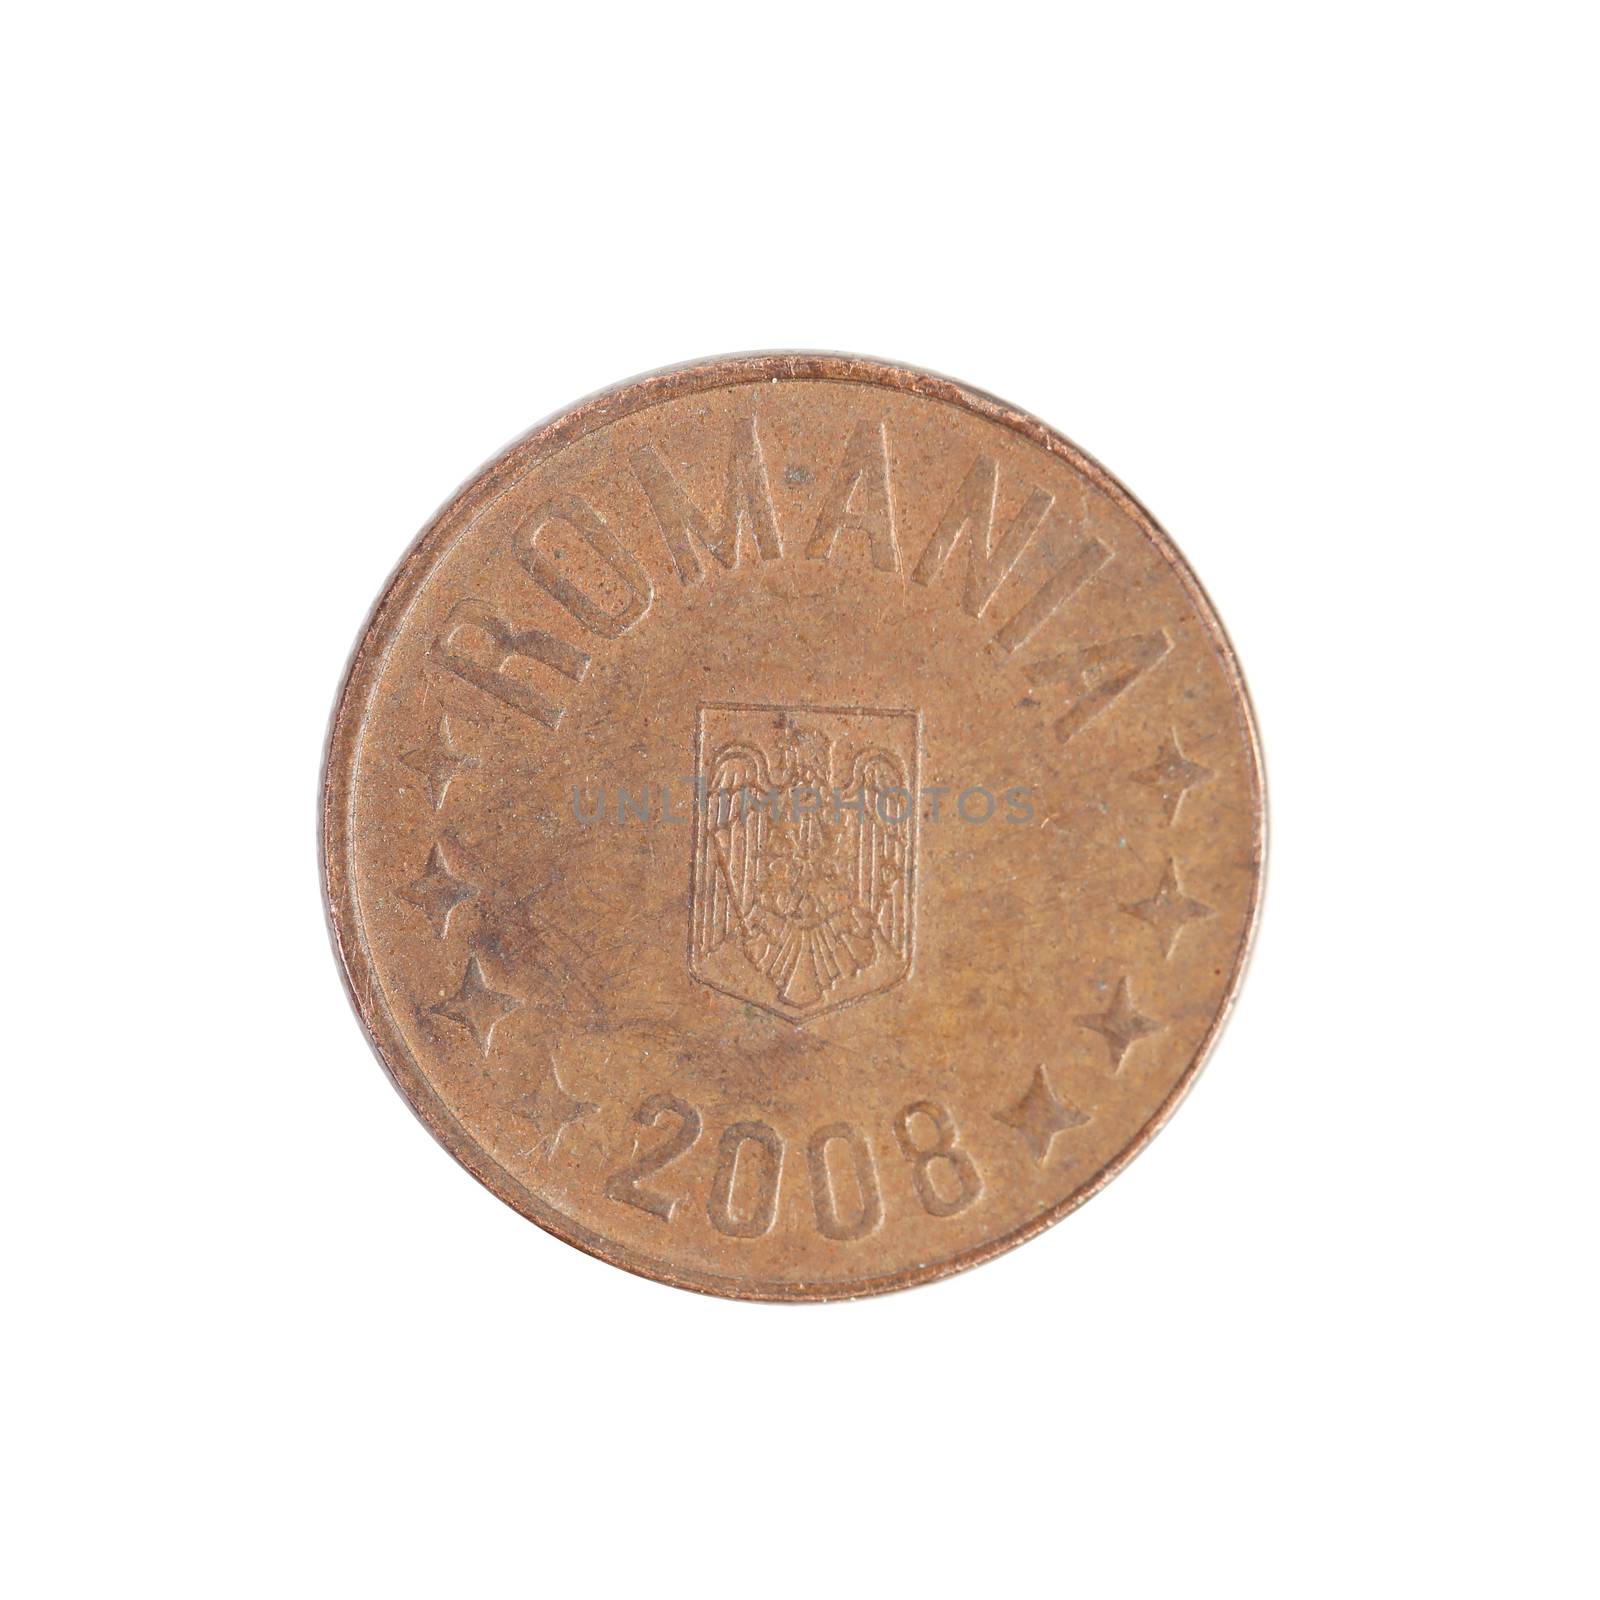 Romanian coin 2008 year. Isolated on a white background.